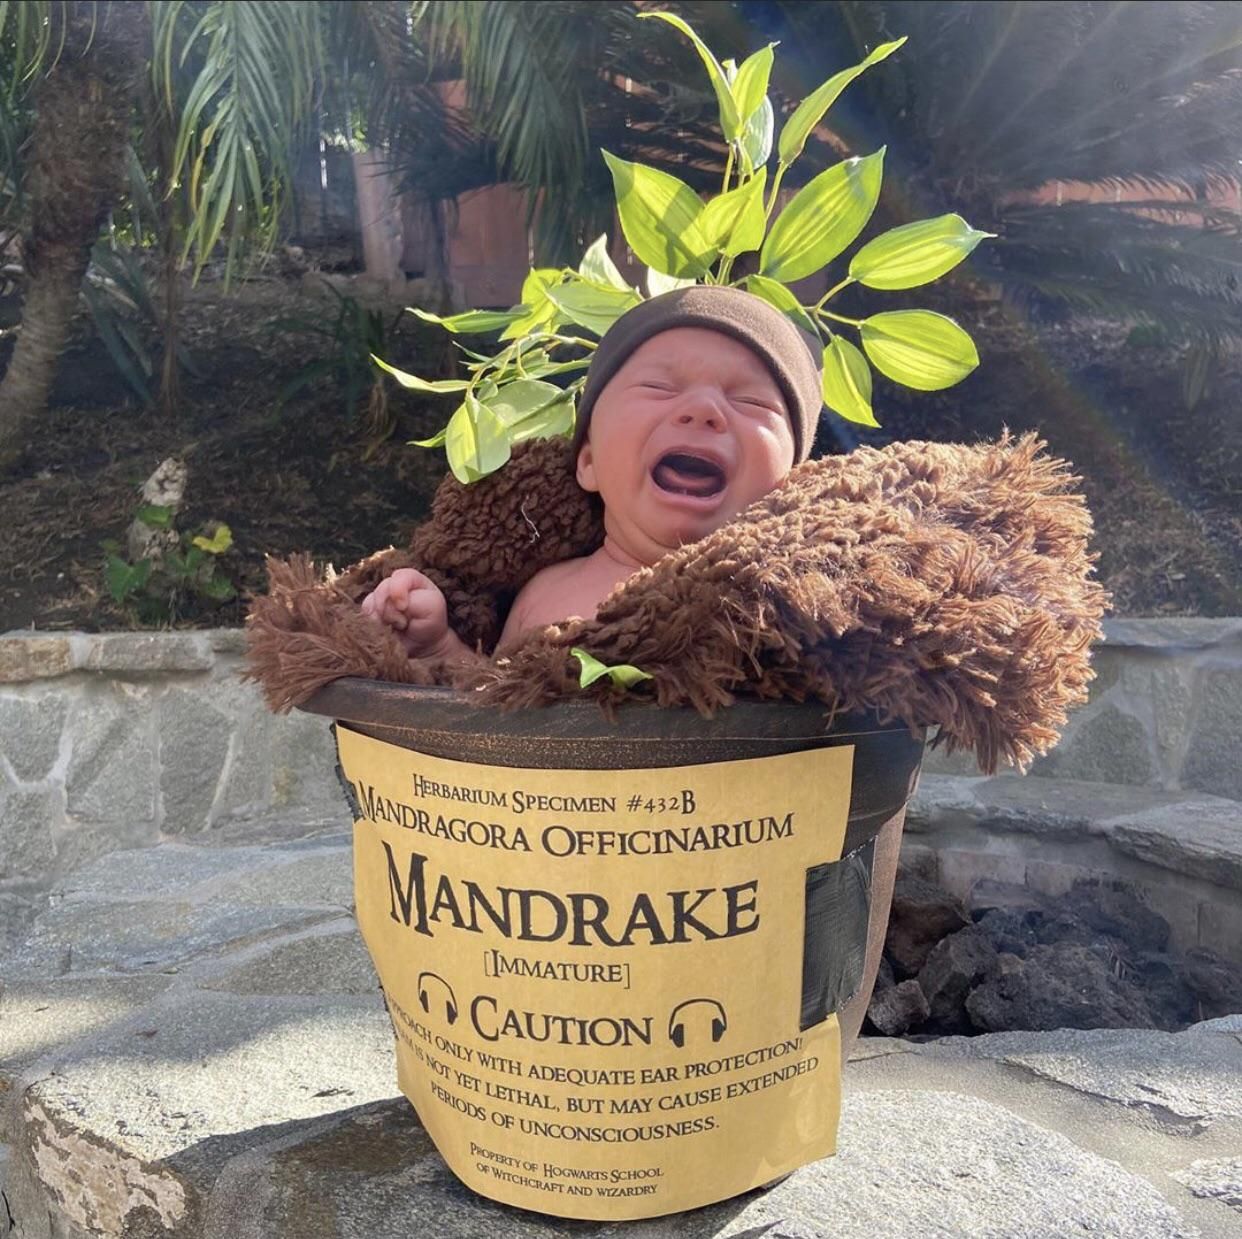 We always joked that our little guy looked like a Mandrake Root when he cried. Therefore, we dressed him up as one for his first Halloween!